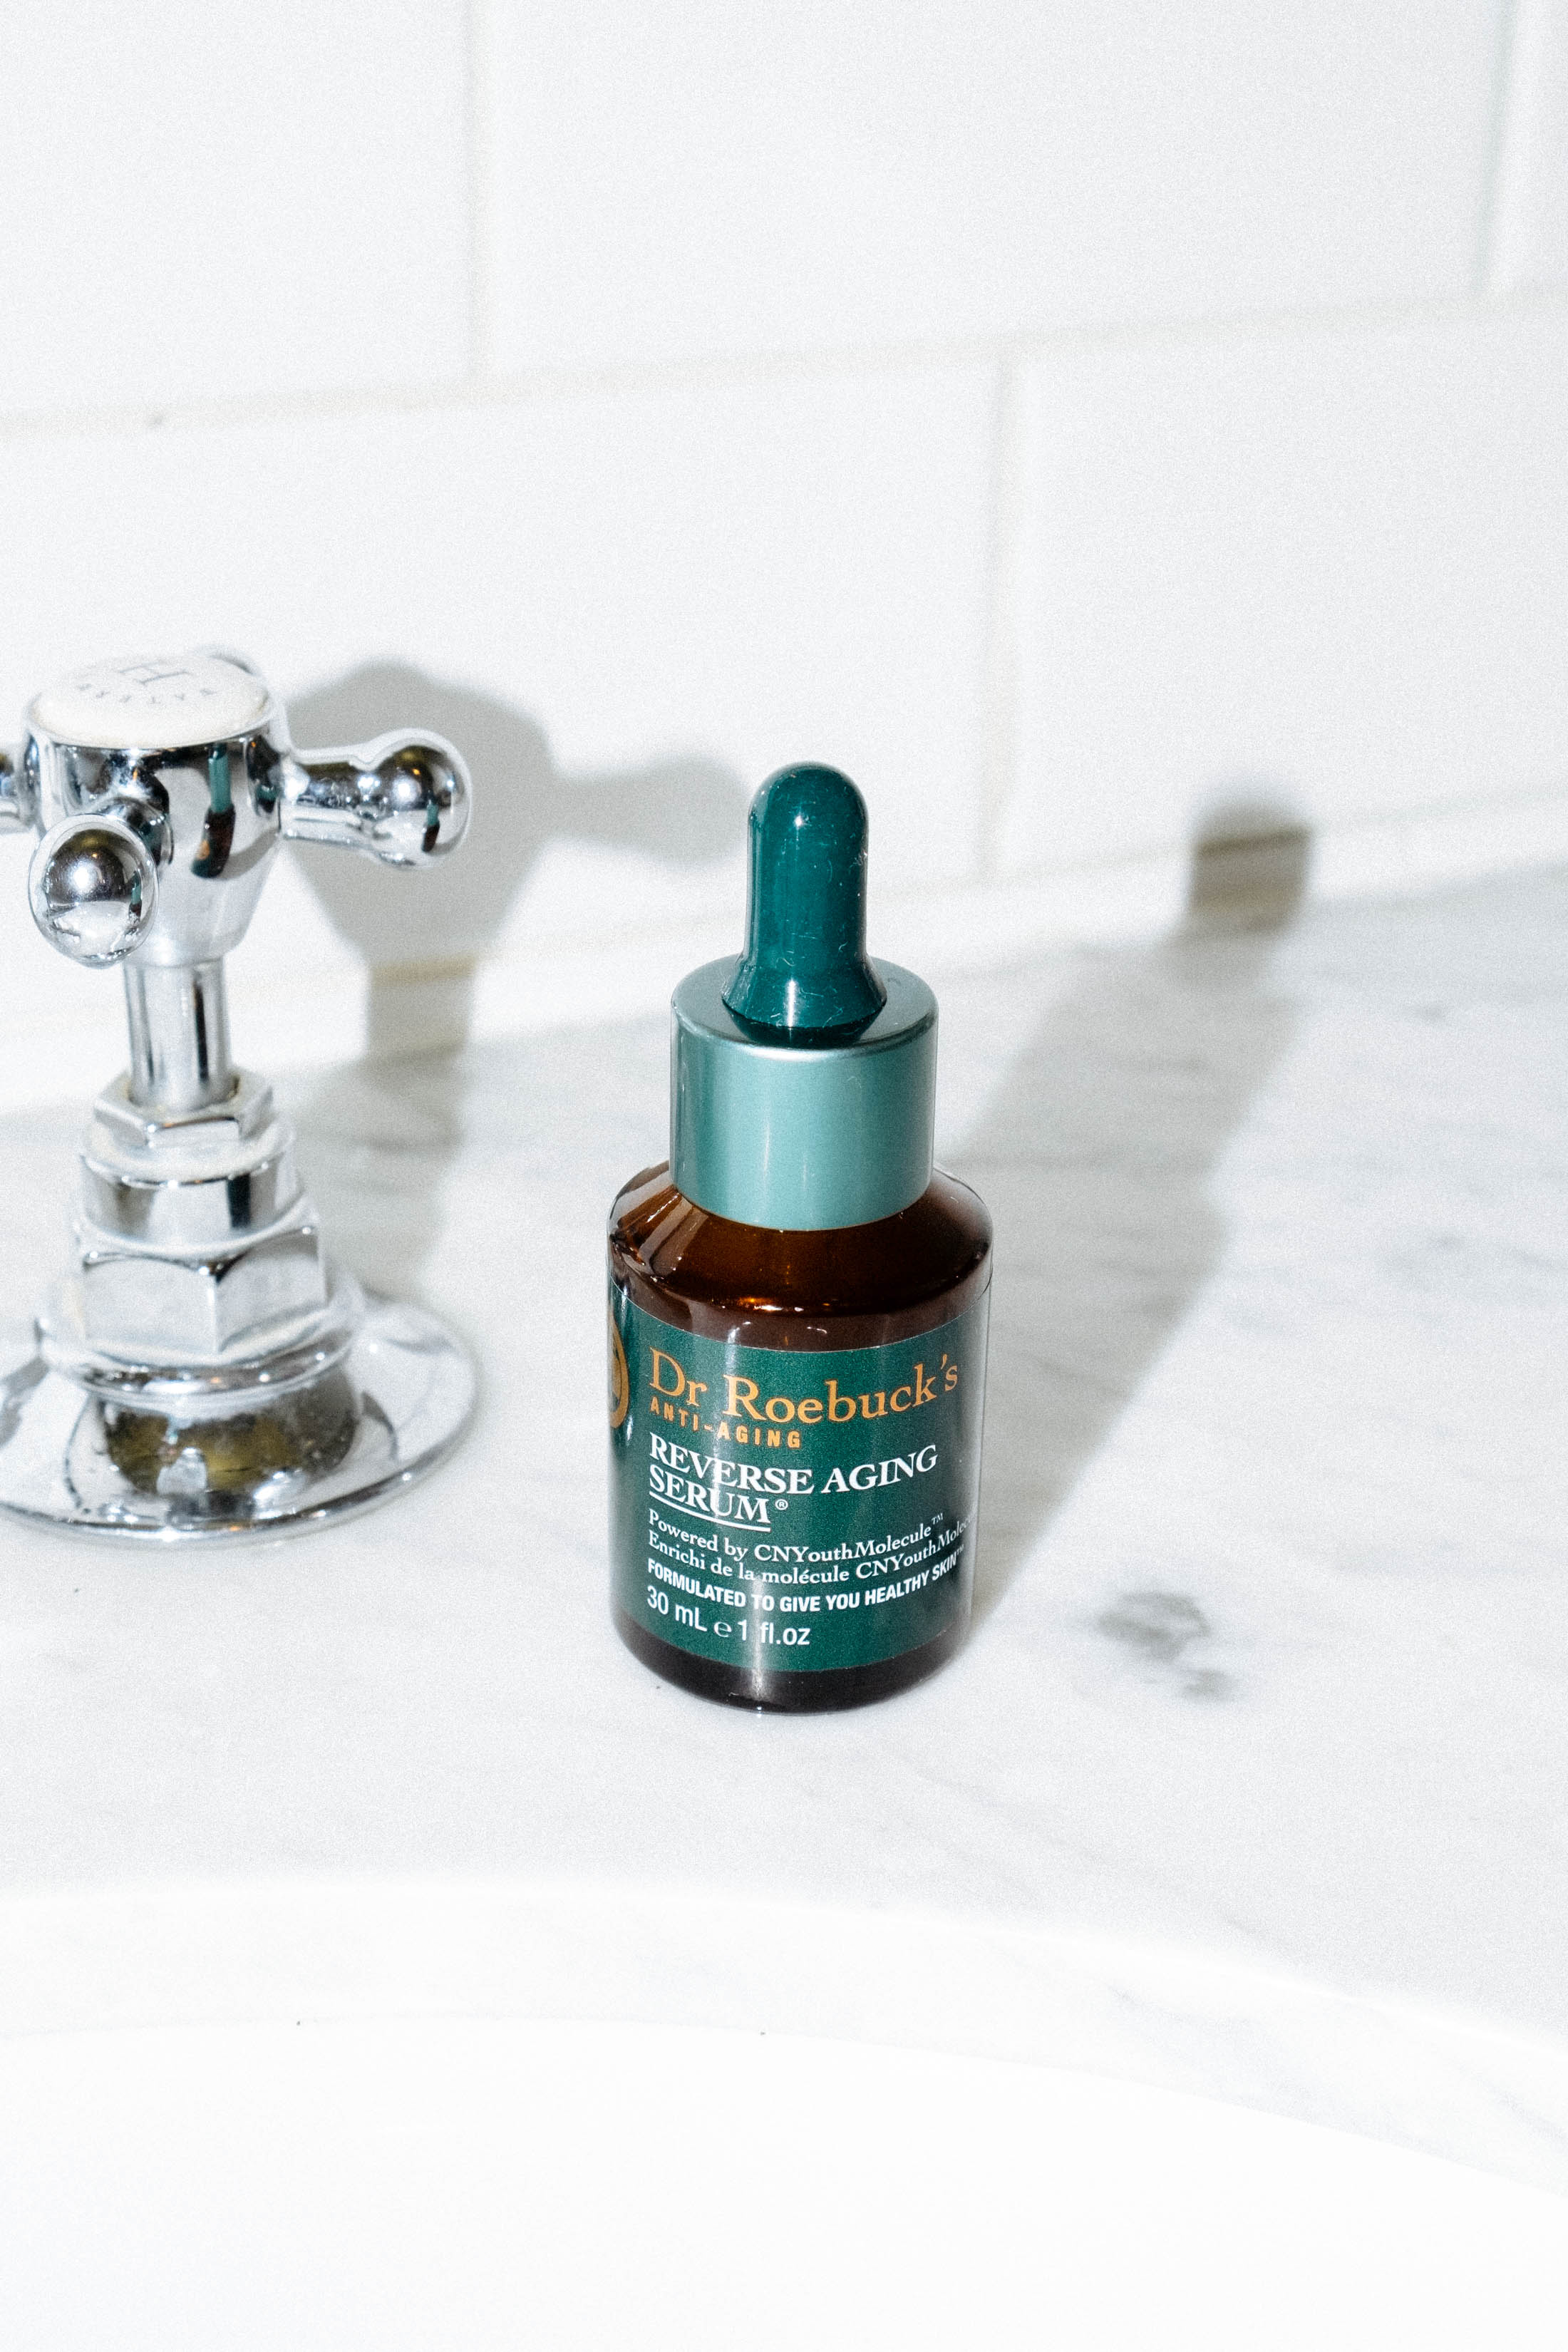 Dr. Roebuck's creamy youth serum is perfect for a nighttime facial beauty routine